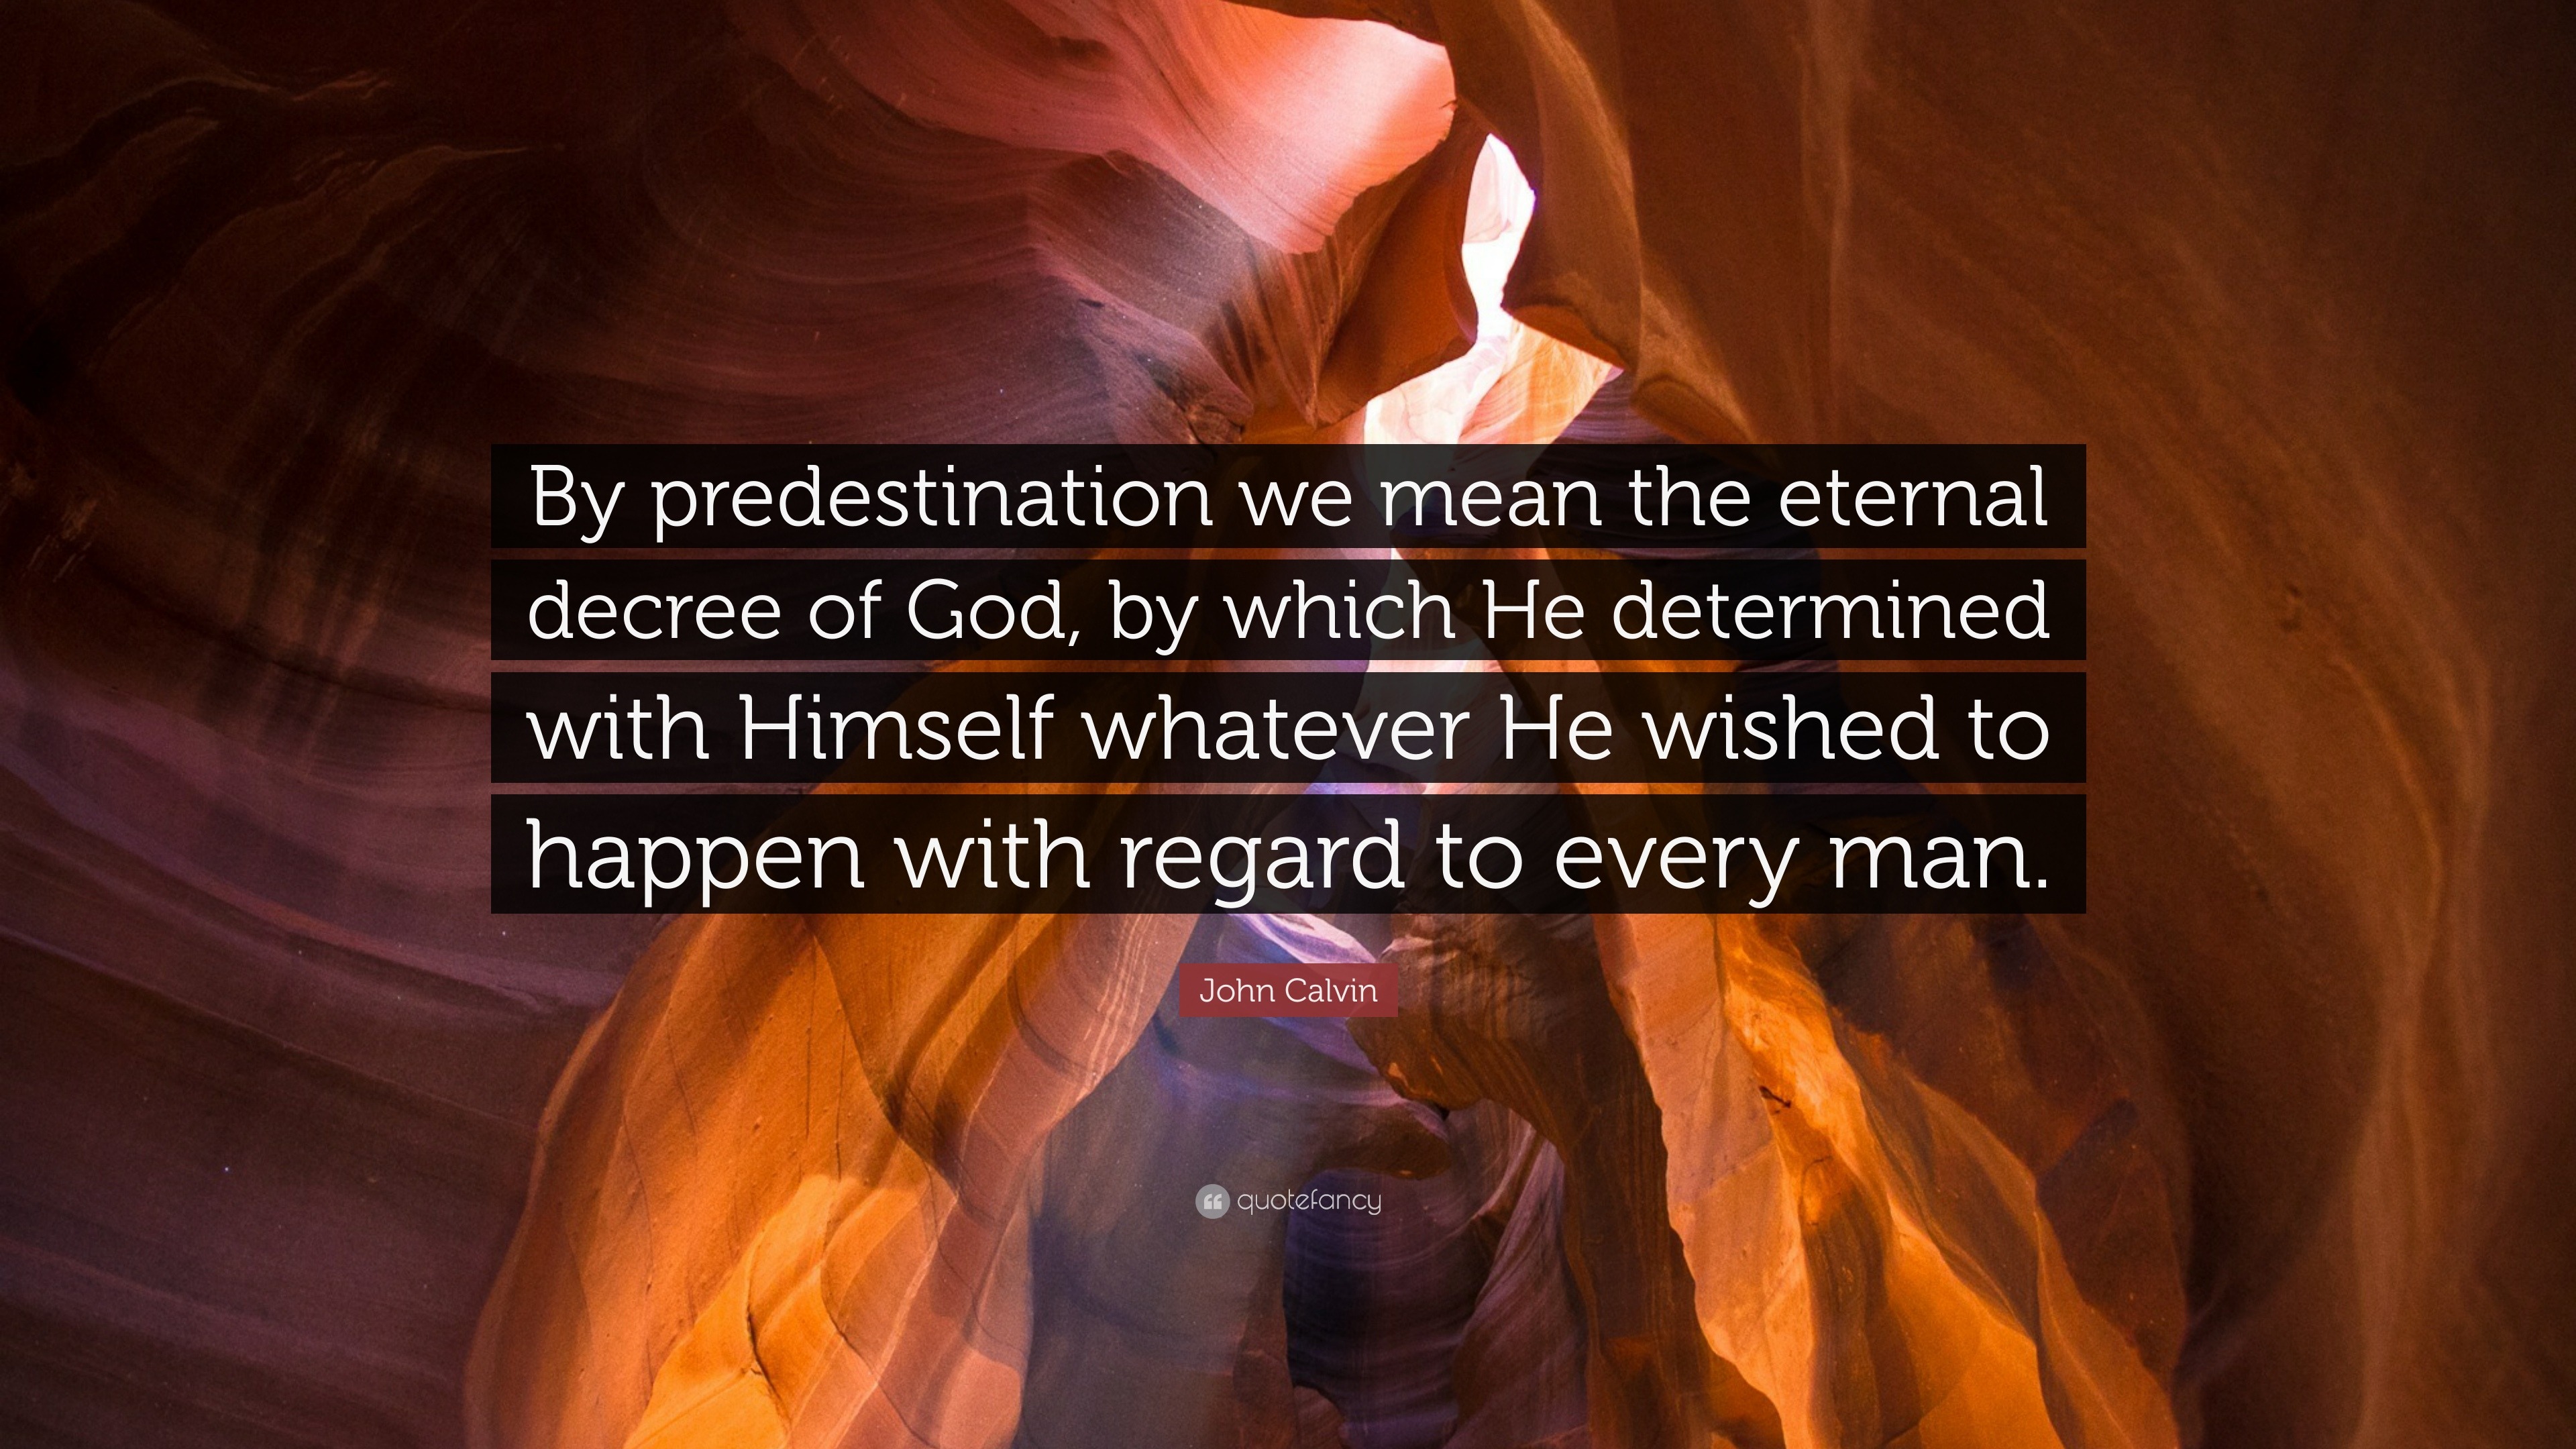 John Calvin Quote: “By predestination we mean the eternal decree of God ... John Calvin Predestination